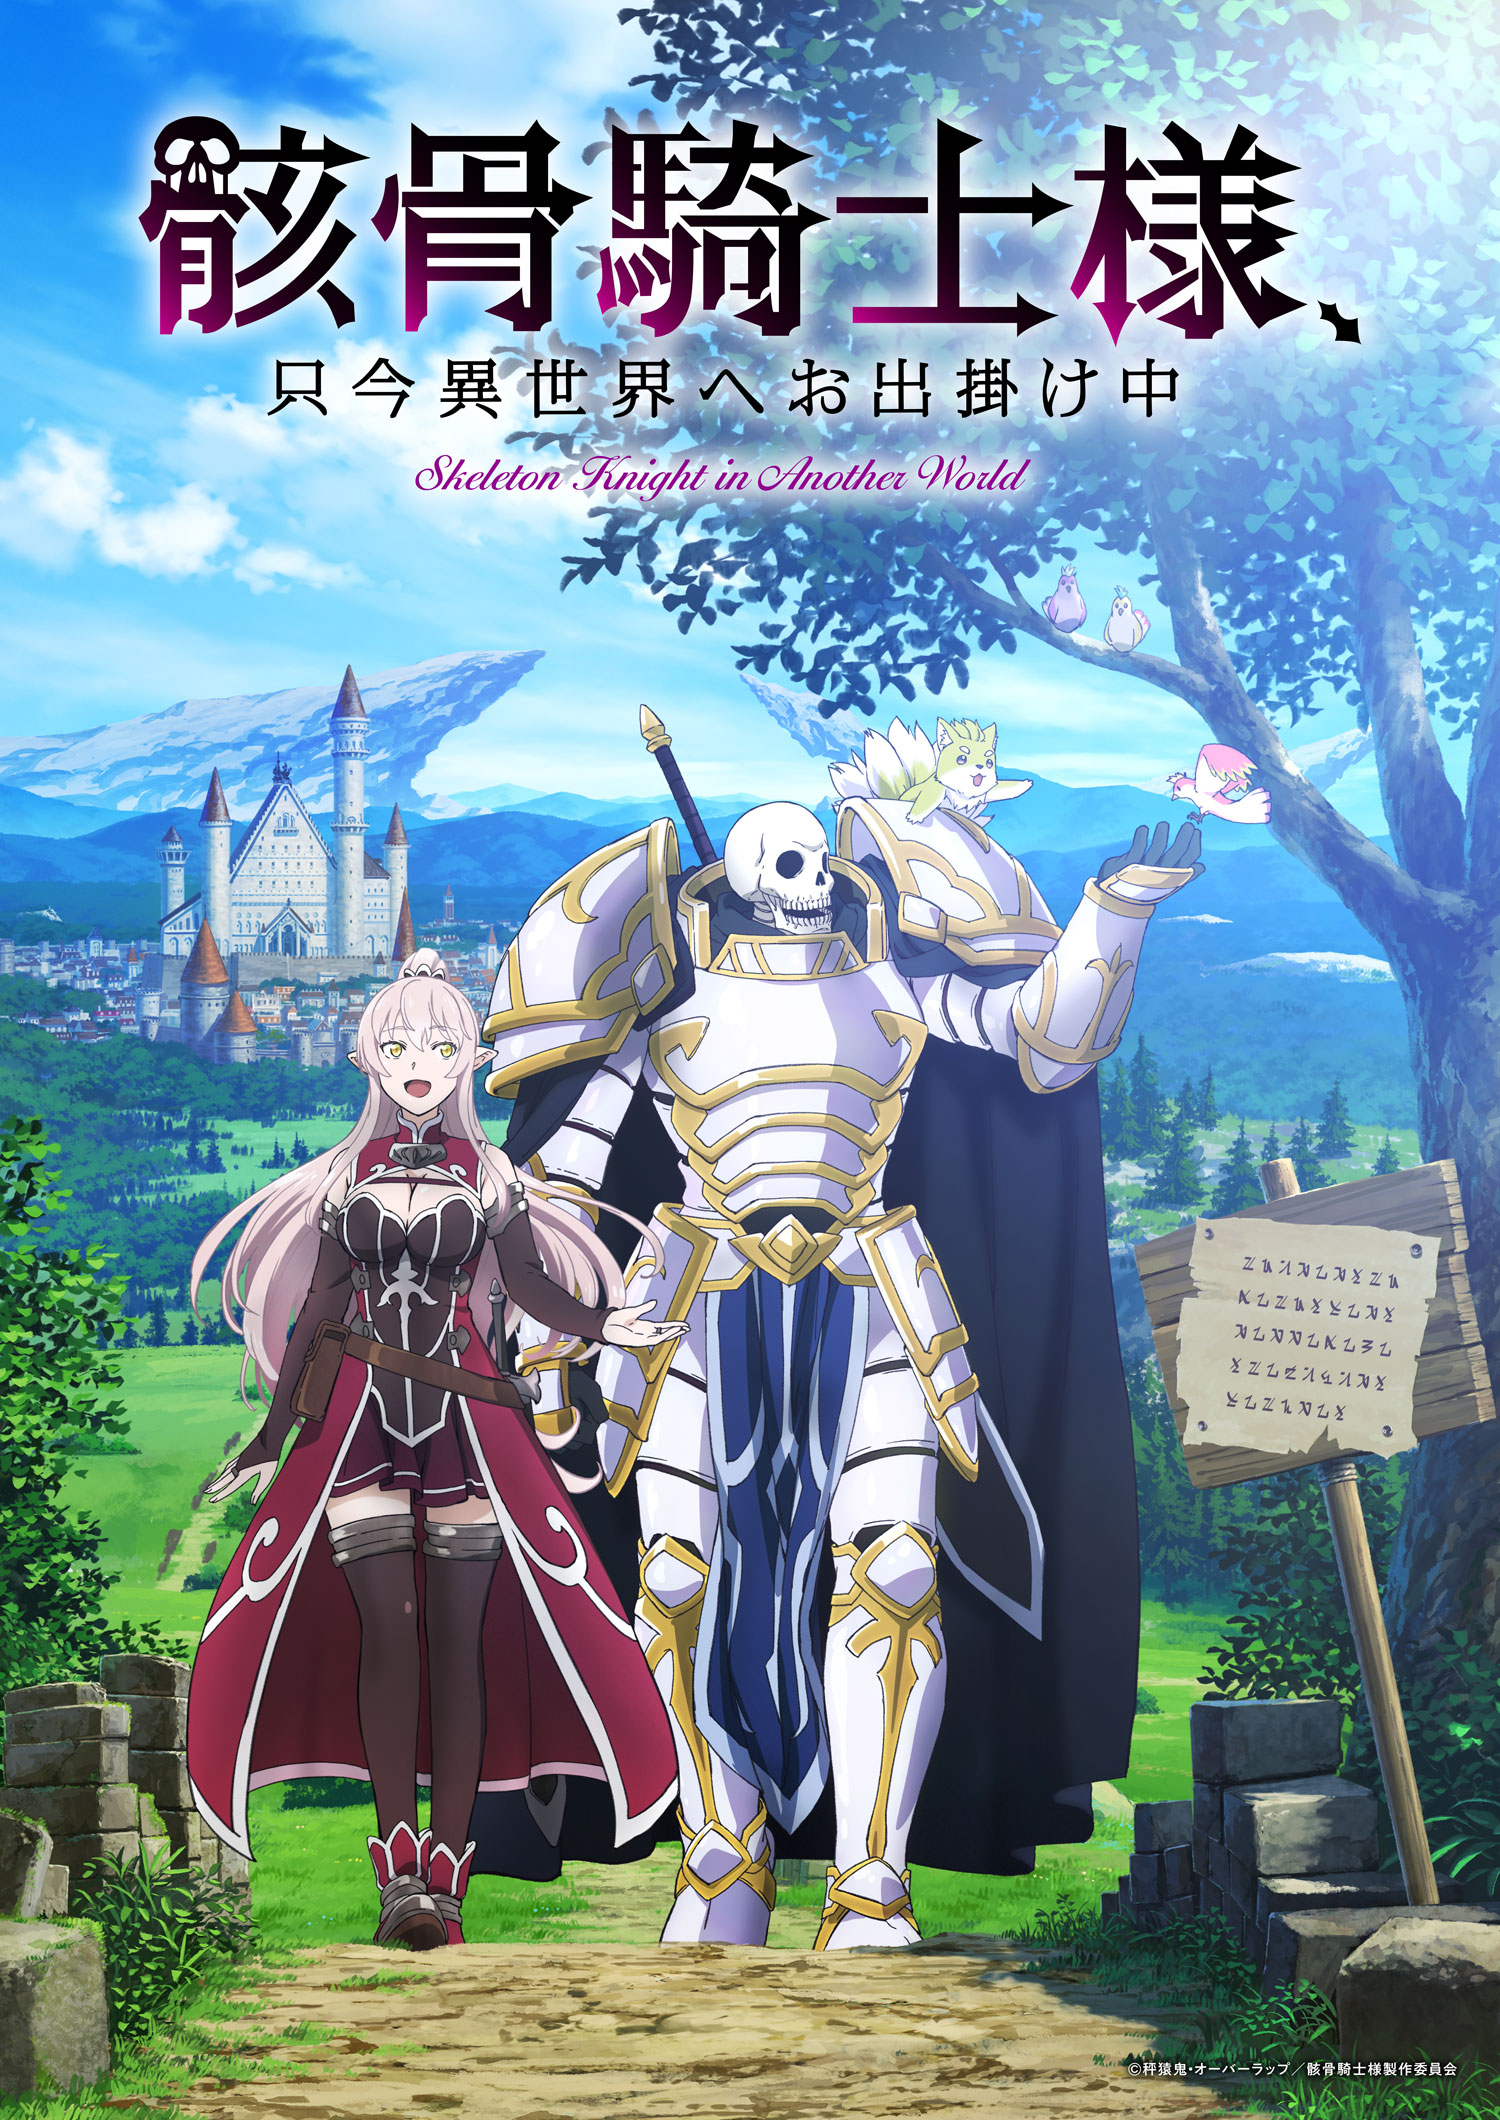 Skeleton Knight in Another World Episode 12 Release Date